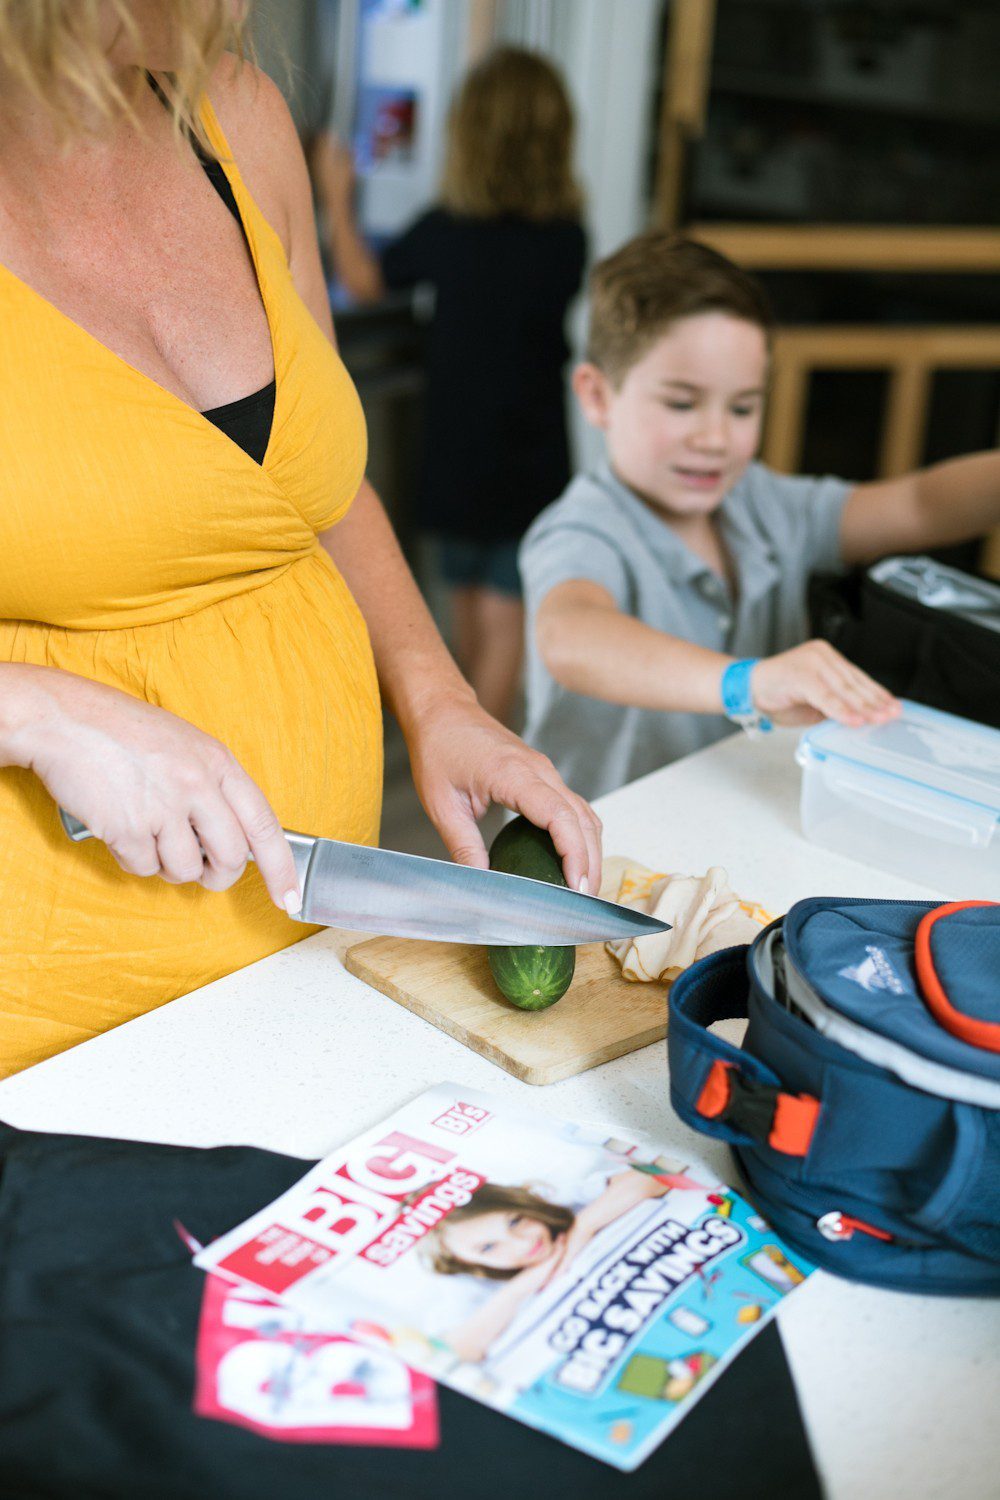 5 Sensational Strategies to Make Getting Ready for School Easy | How to Get Ready for School: 5 Sensational Strategies to Make Easy on your Family by popular Tampa life and style blog, Fresh Mommy: image of a woman standing her kitchen cutting a cucumber while her kids pack things into their lunch bags.